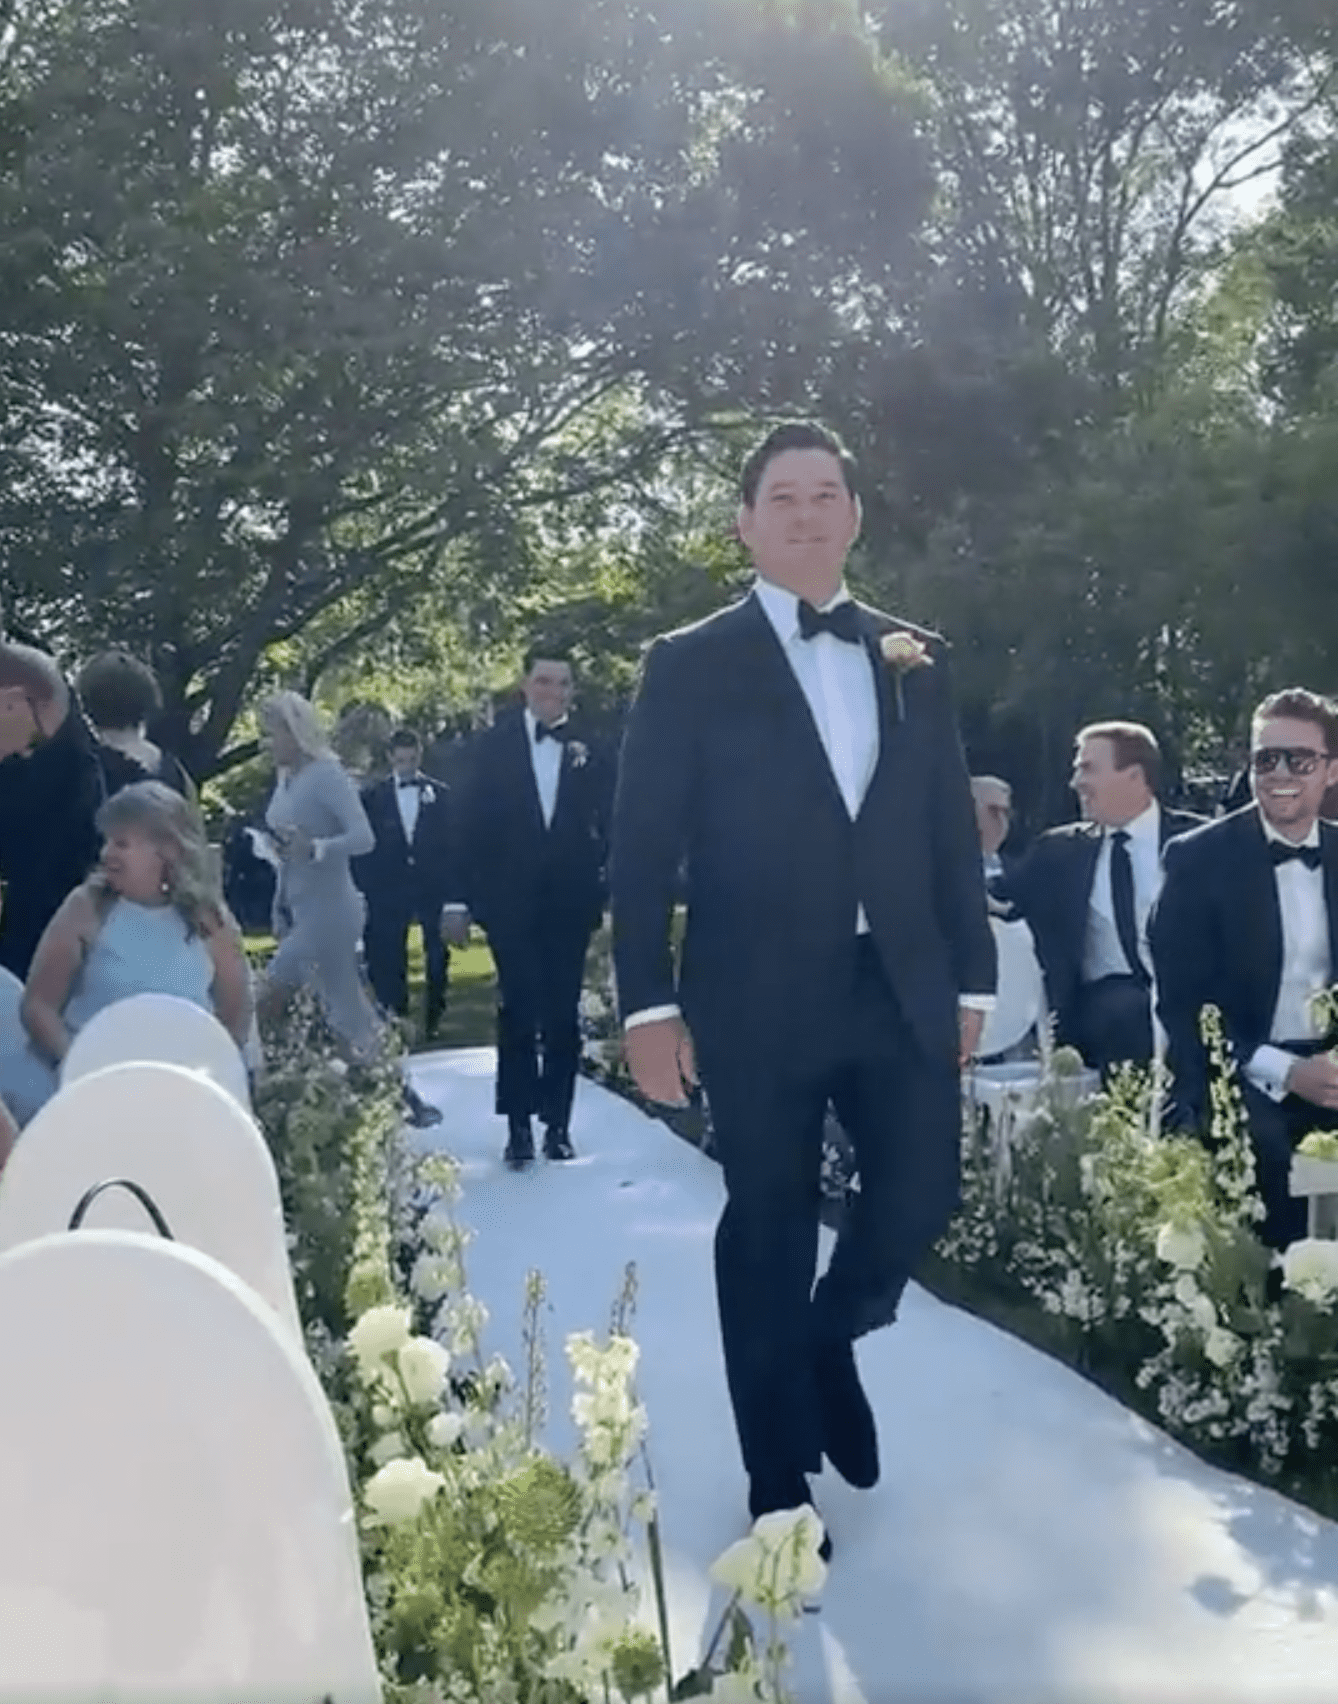 The groom walks down the aisle with the lady in cream-colored dress pictured in the background. | Source: reddit.com/r/weddingshaming